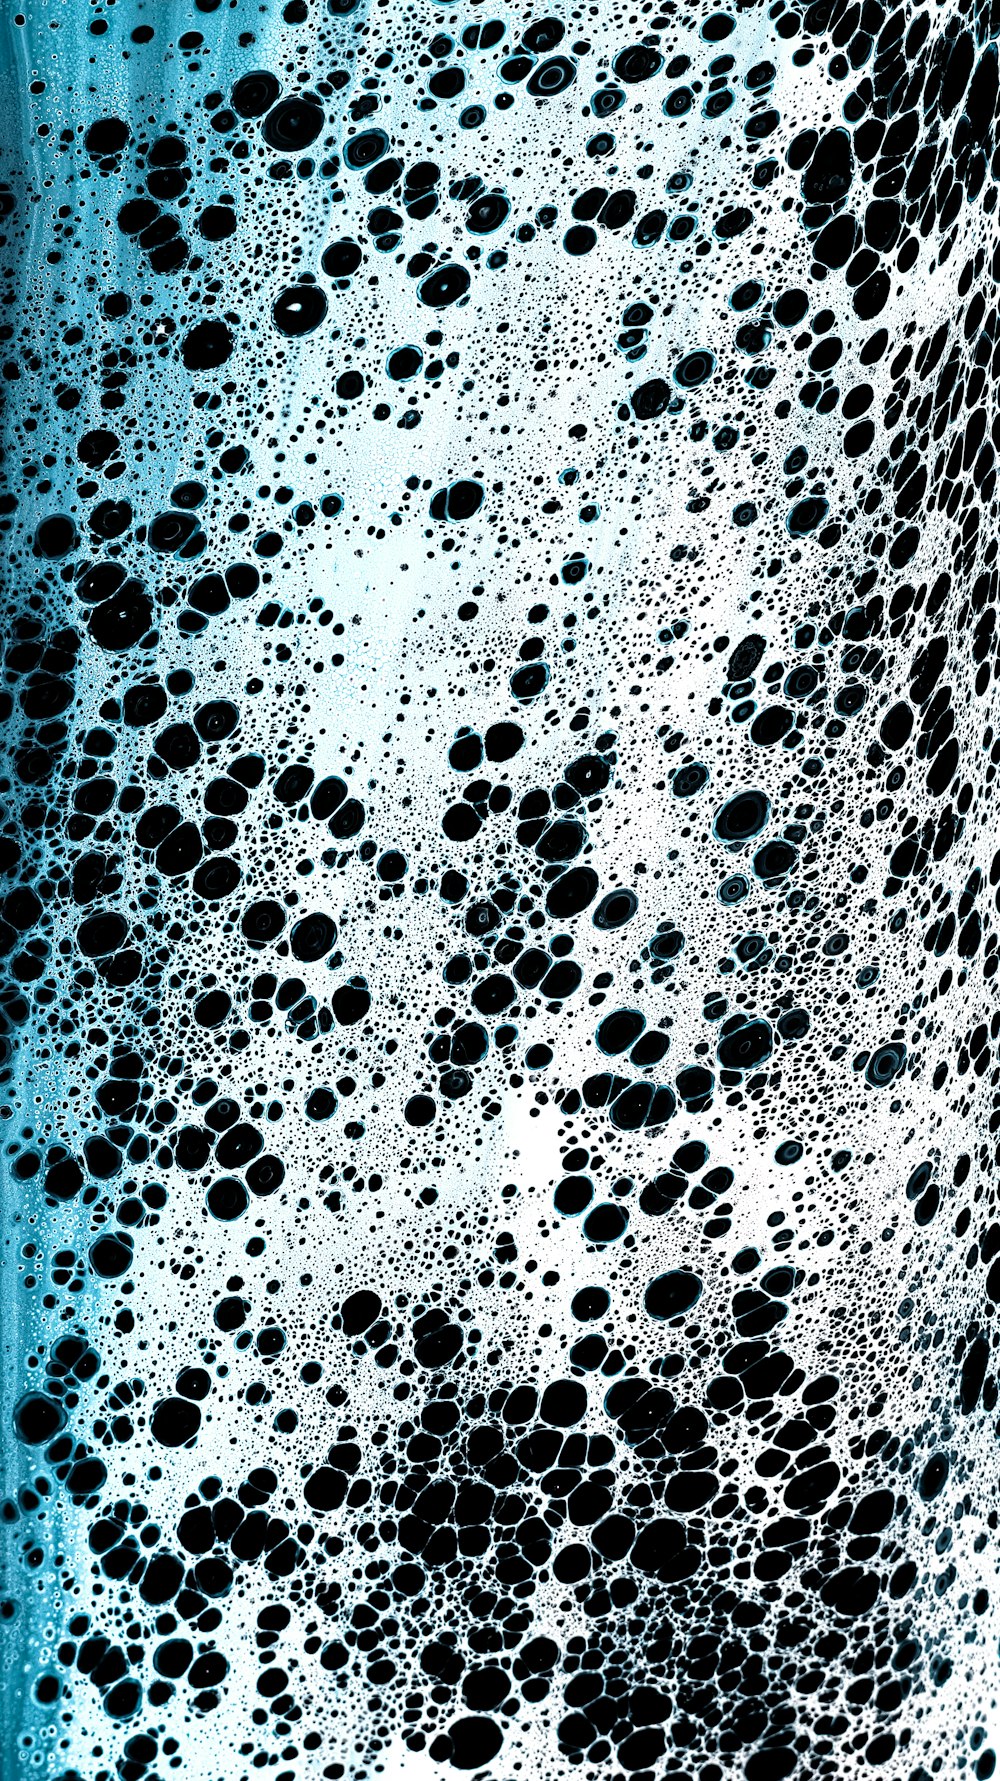 a black and white photo of bubbles in water